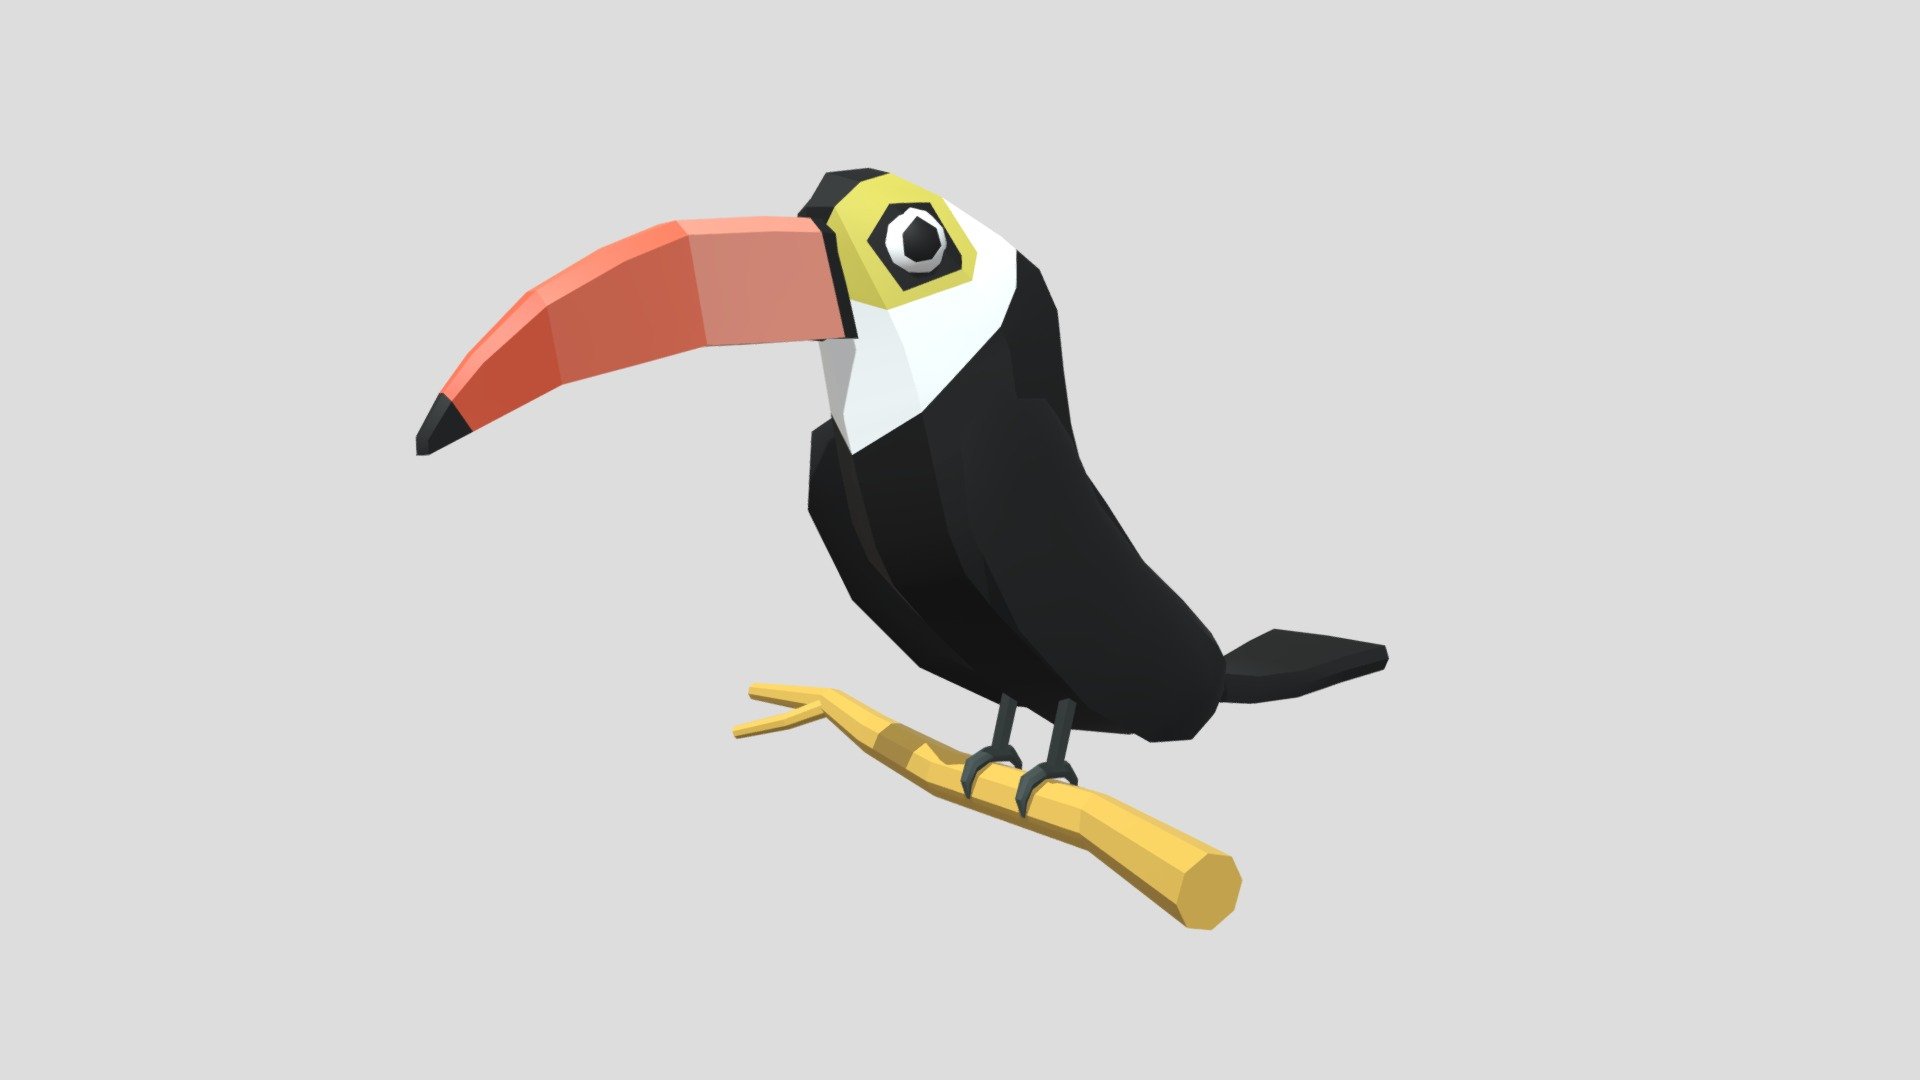 -Low Poly Cartoon Toucan Bird.

-This product contains 4 models.

-This product was created in Blender 2.8.

-Total vertices: 782. Total polygons: 841;

-Formats: . blend . fbx . obj, c4d,dae,fbx,unity.

-We hope you enjoy this model.

-Thank you 3d model